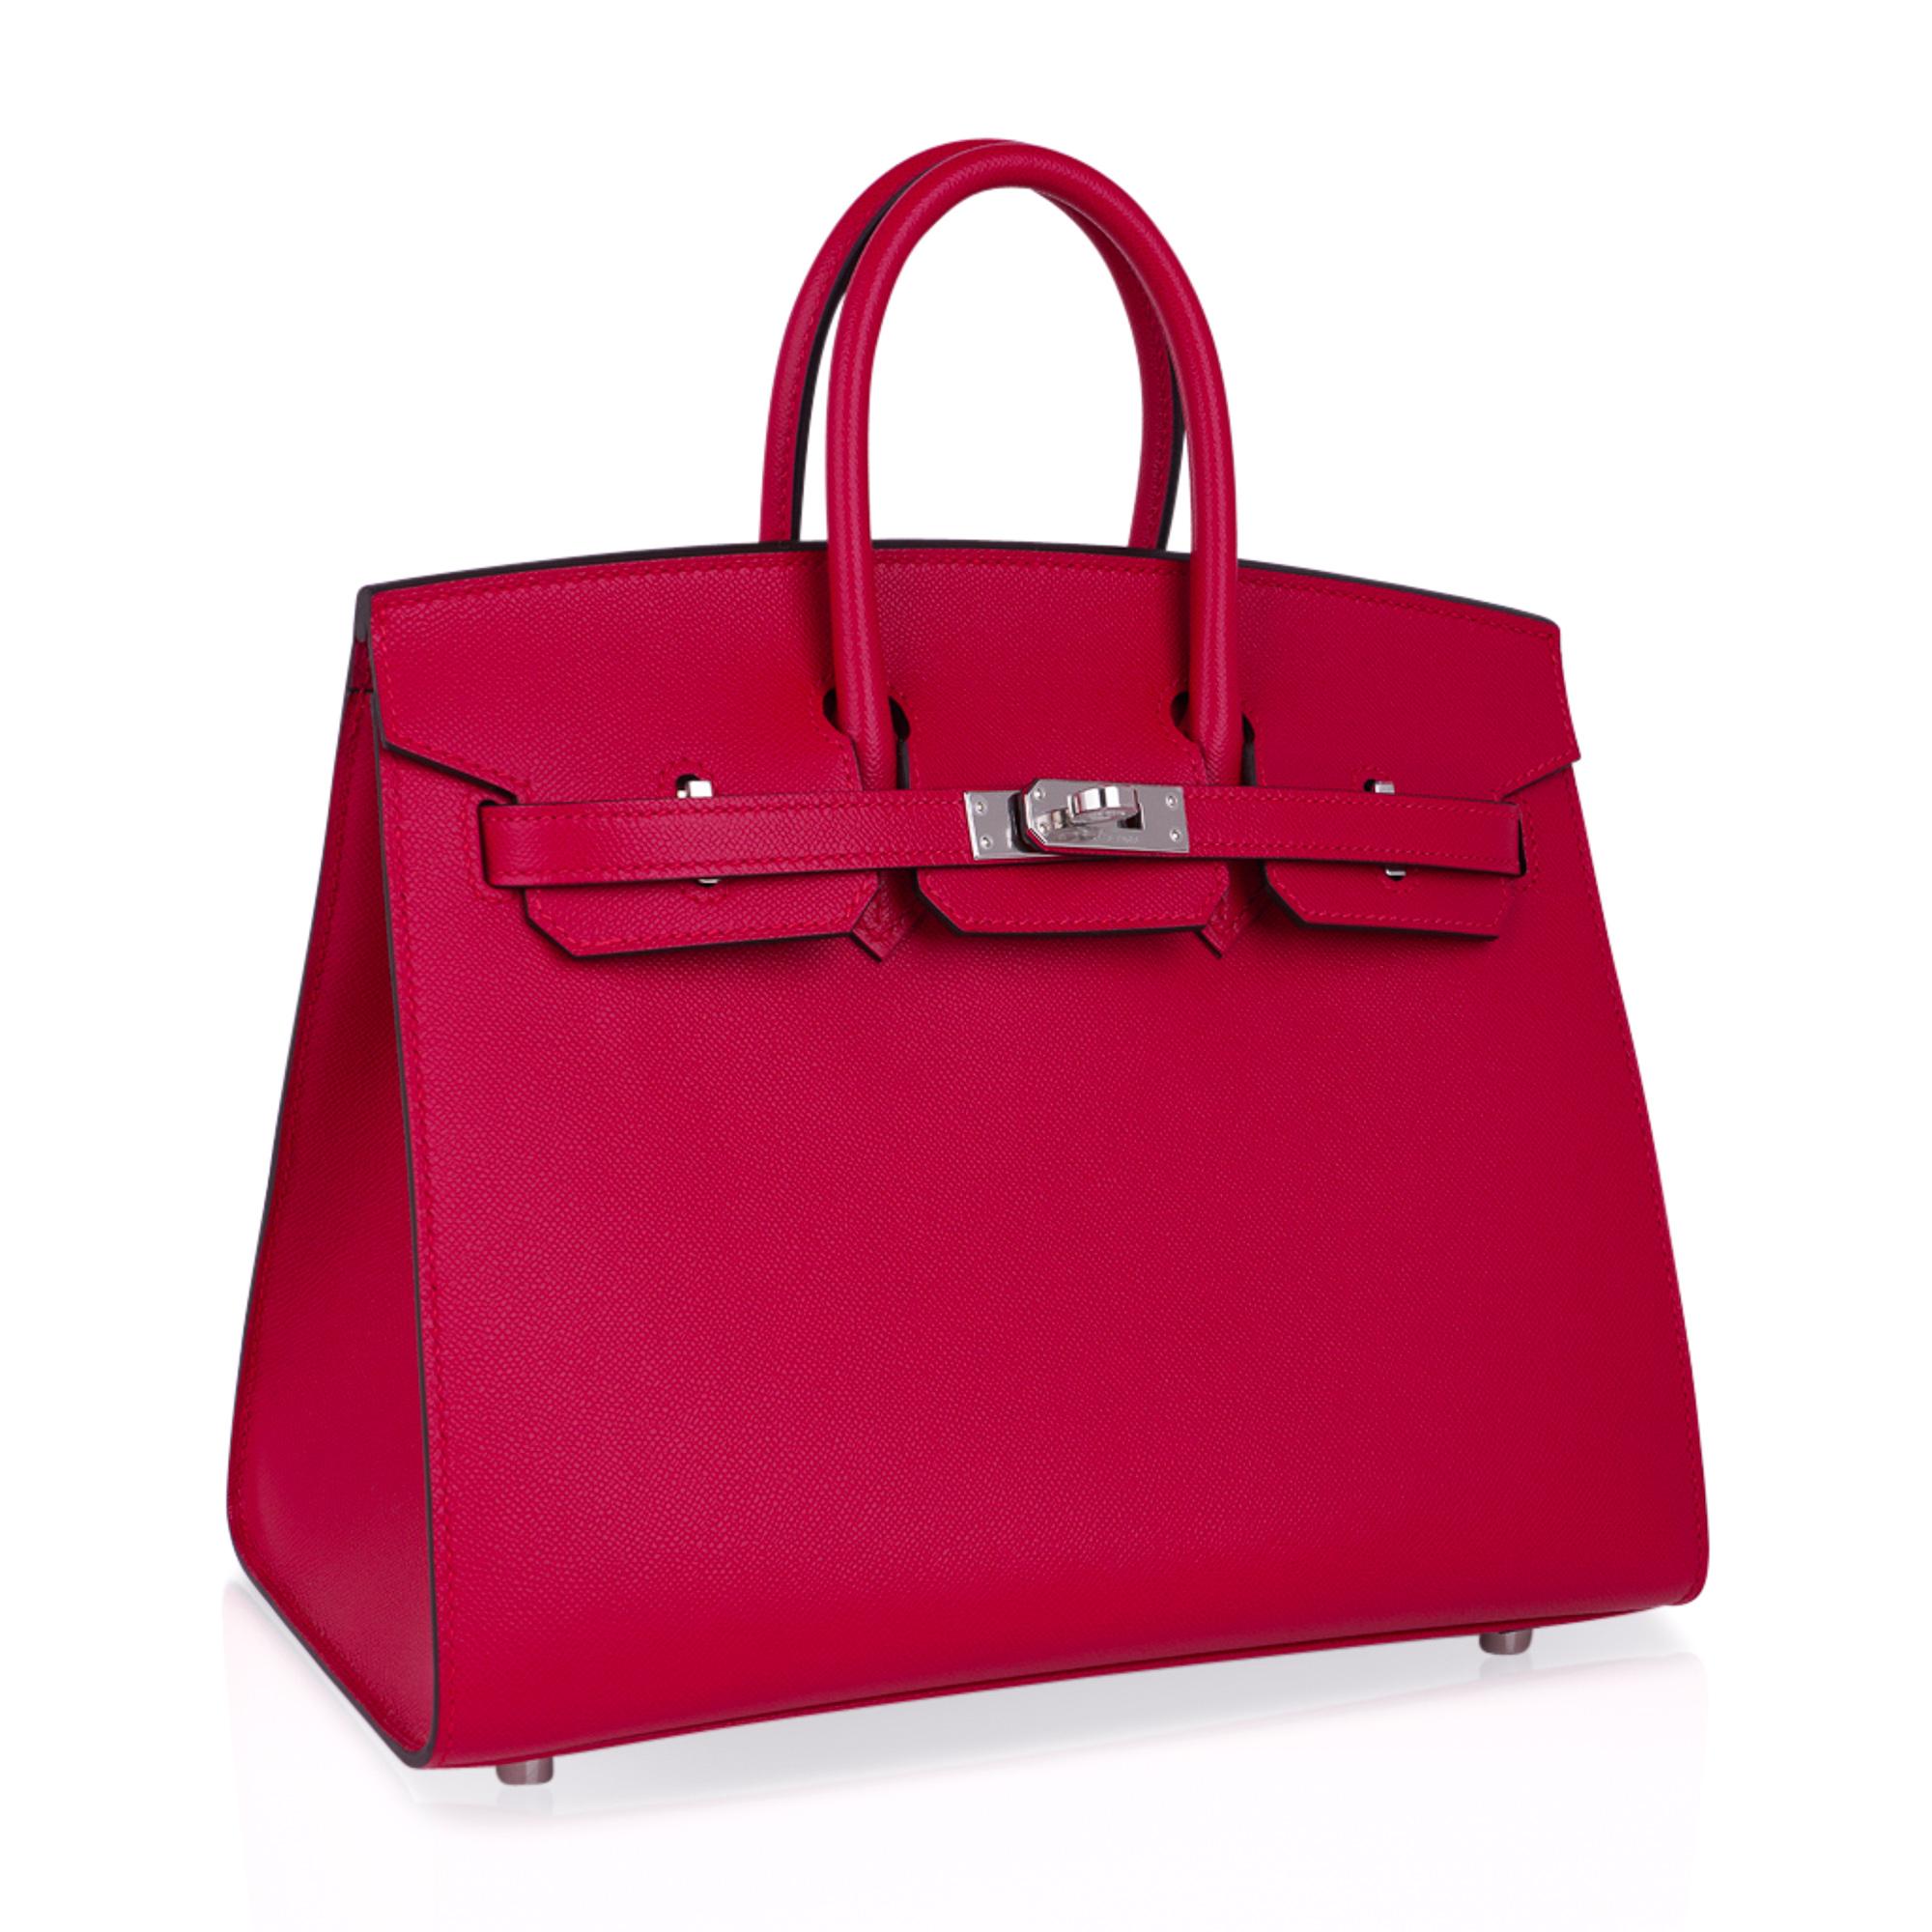 Mightychic offers an Hermes Birkin Sellier 25 bag featured in vibrant Framboise.
Hermes Framboise is a rich, saturated raspberry pink which is gorgeous for year round wear.
This limited edition bag is now retired and is sure to become a collectors